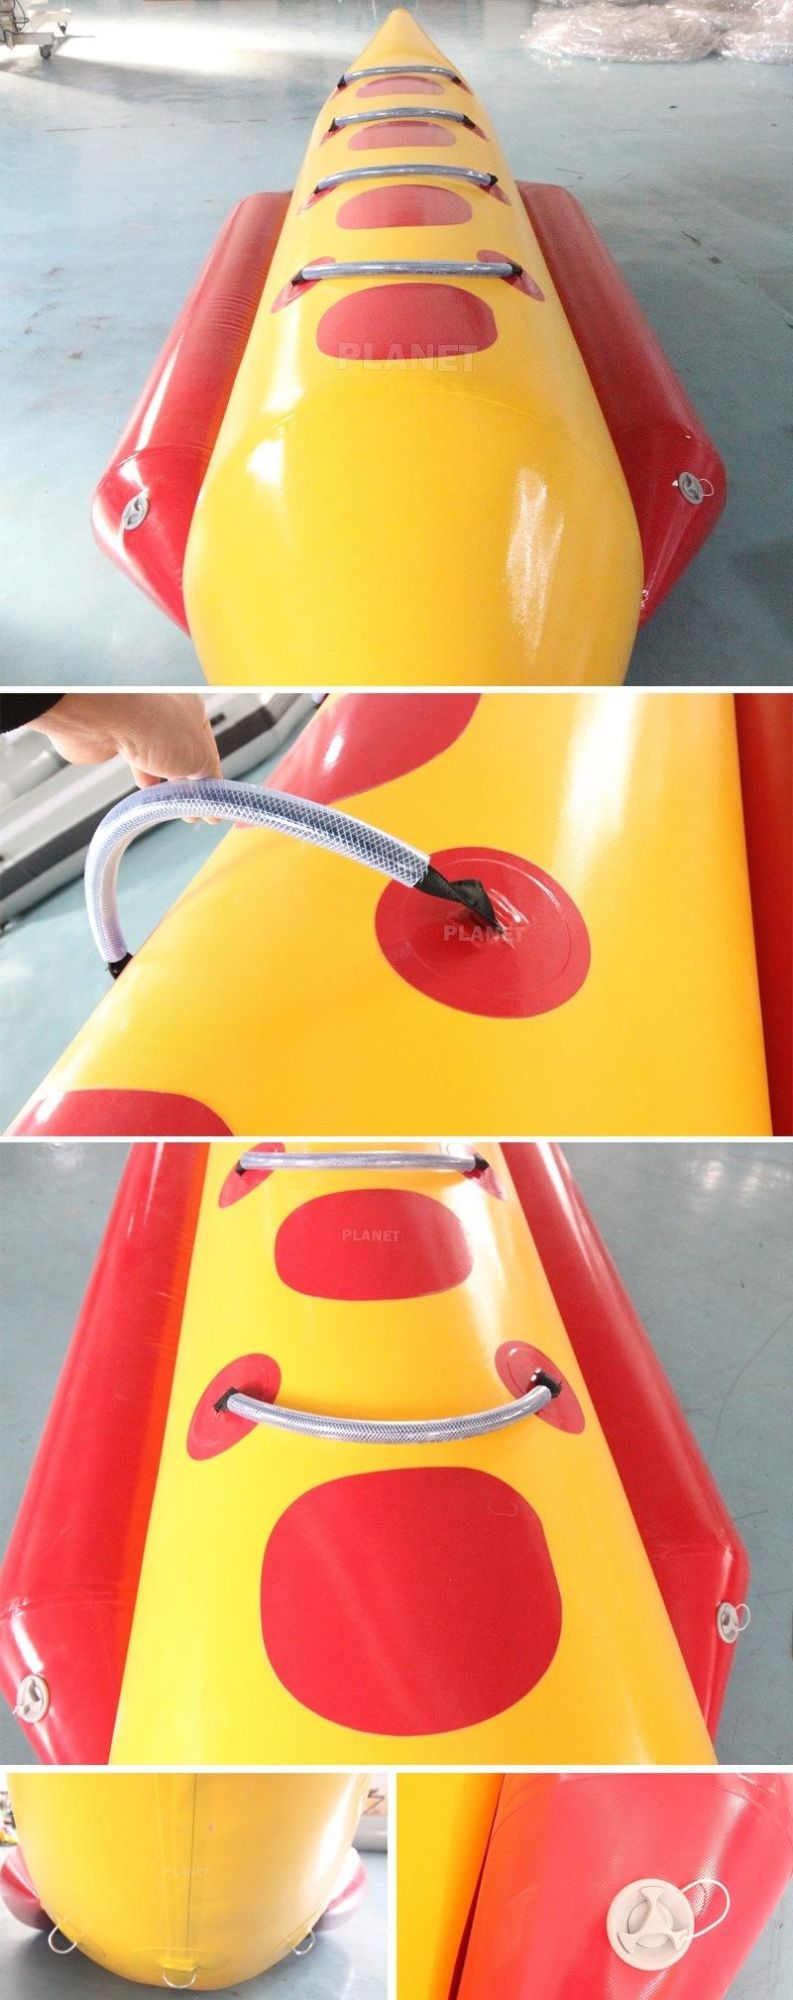 Crazy Design Inflatable Water Banana Boat for Camping